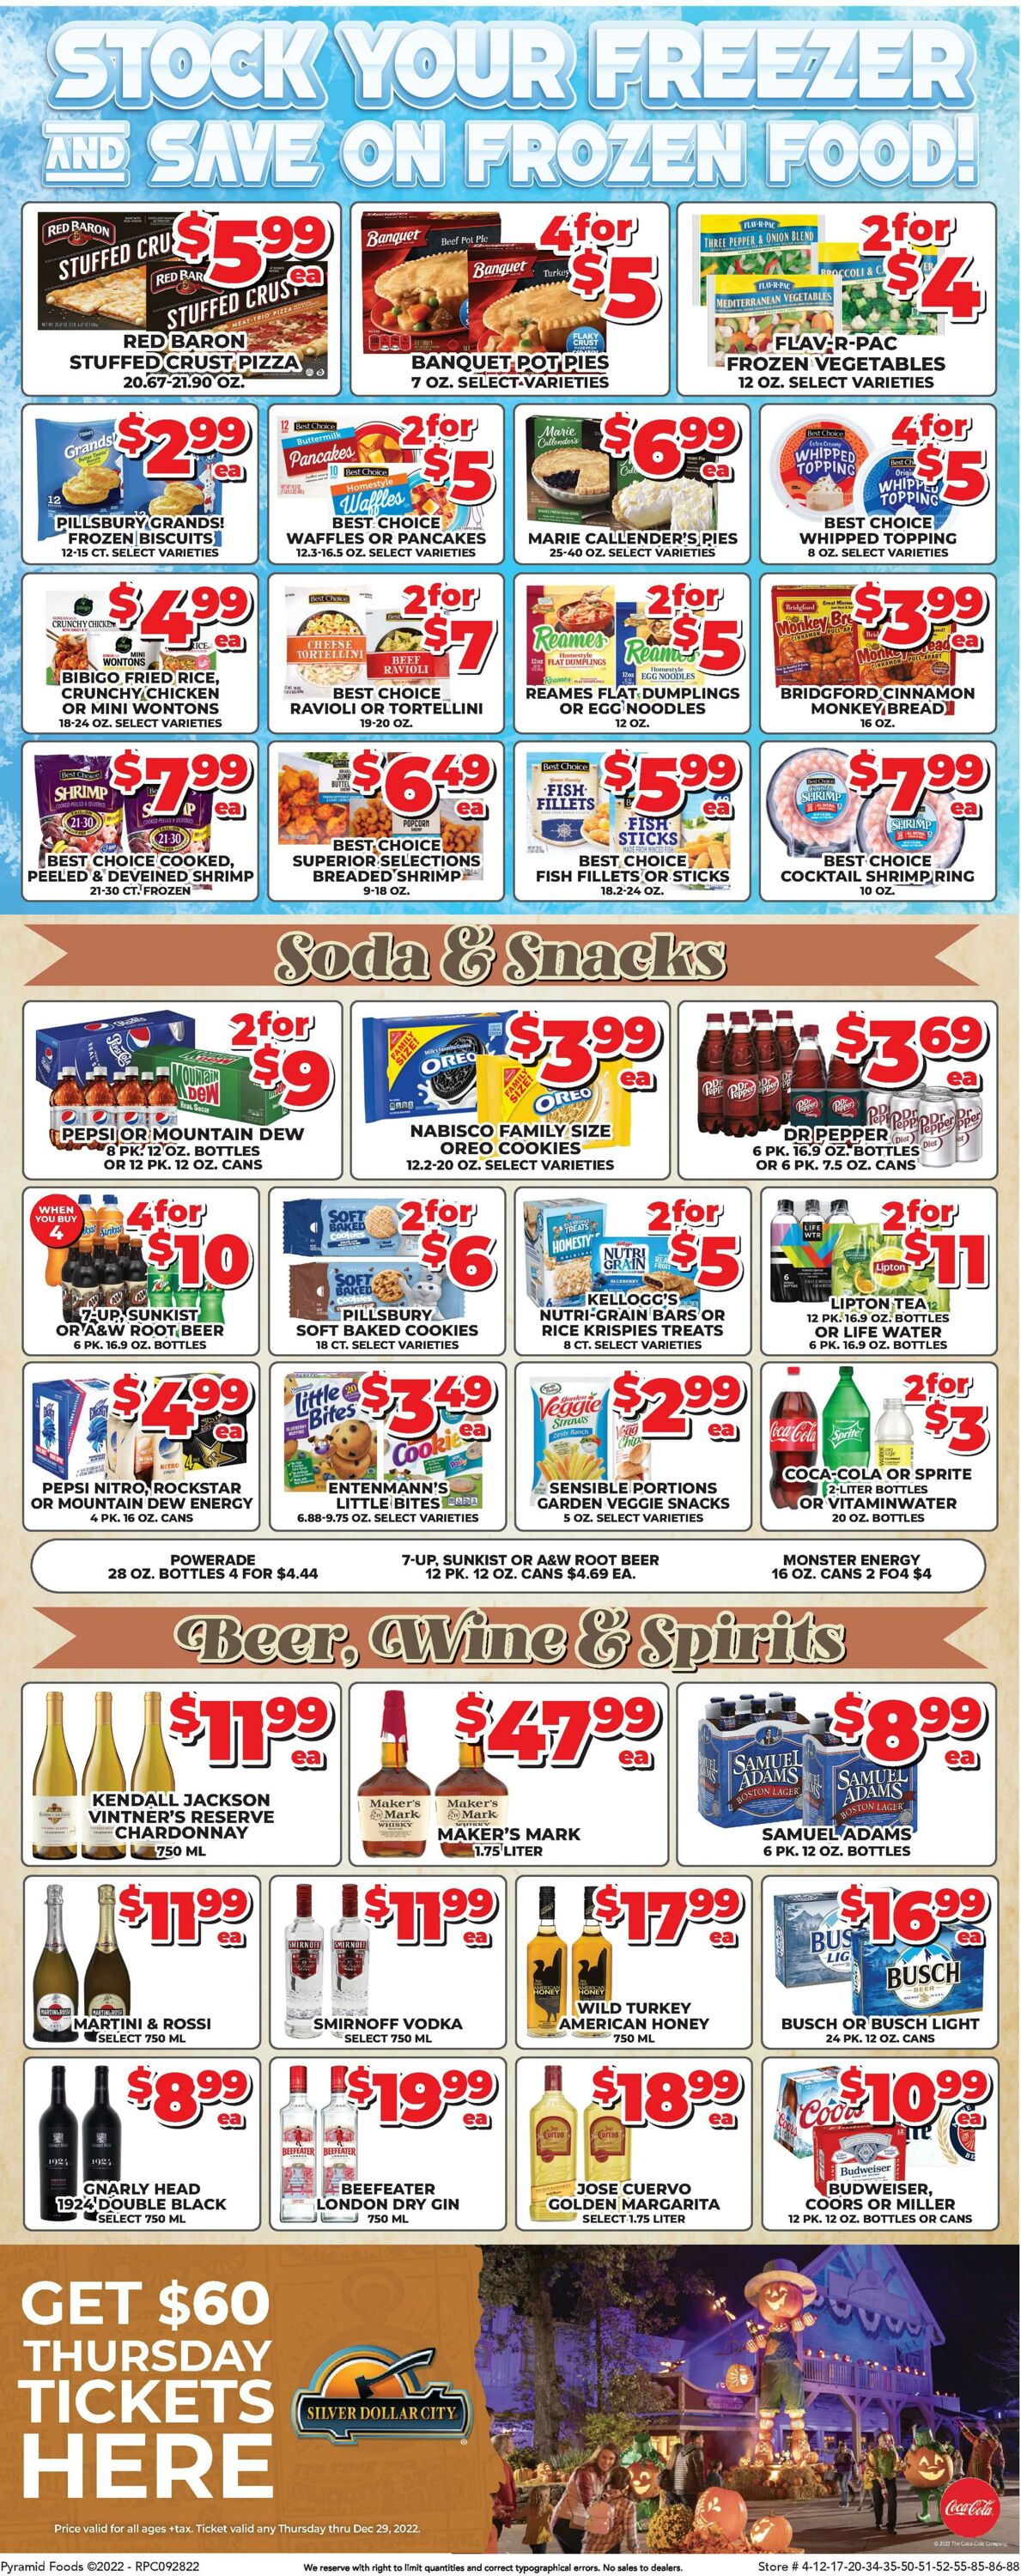 Weekly ad Price Cutter 09/28/2022 - 10/04/2022